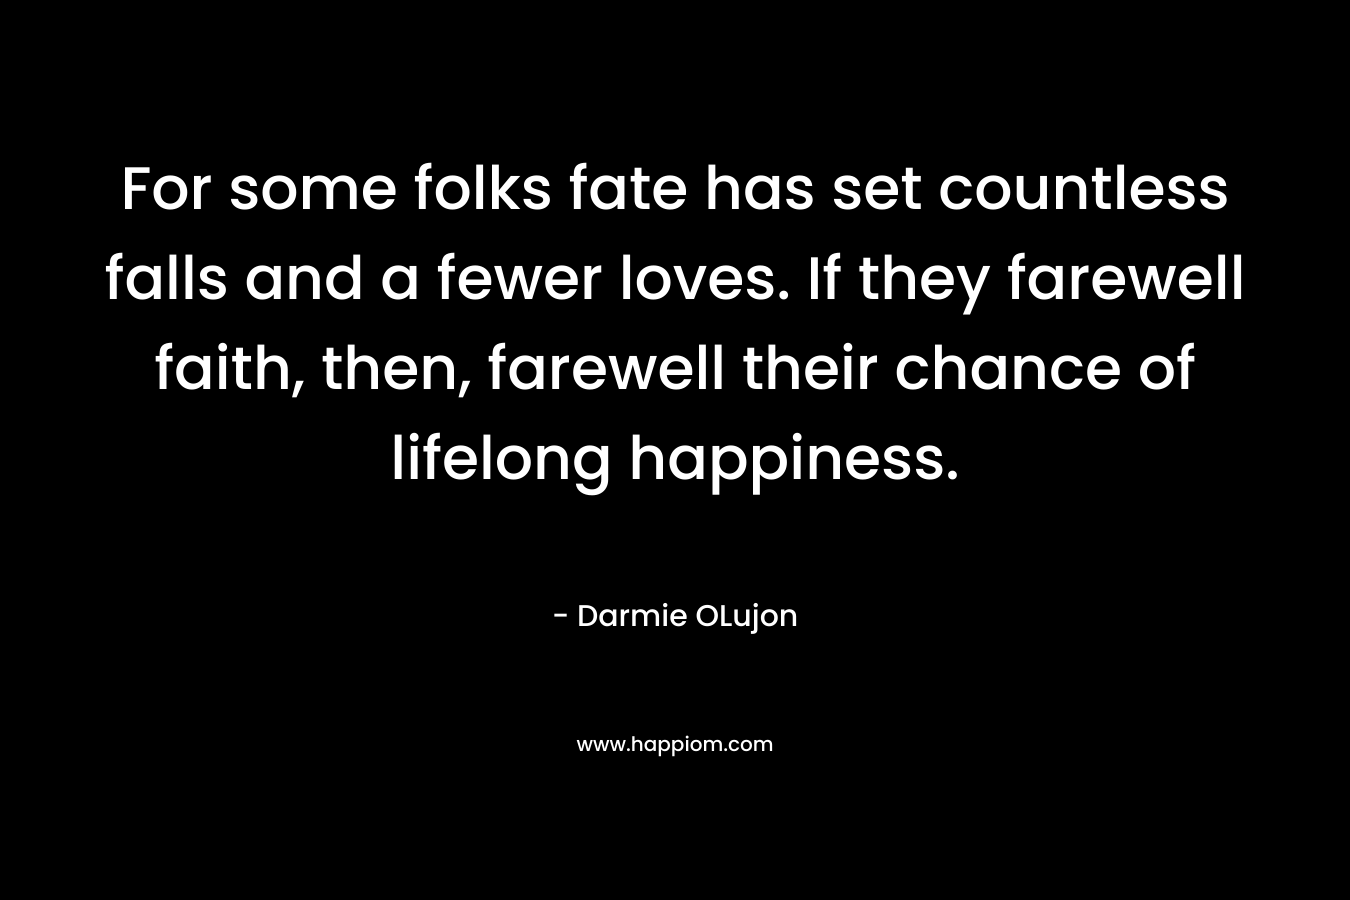 For some folks fate has set countless falls and a fewer loves. If they farewell faith, then, farewell their chance of lifelong happiness. – Darmie OLujon